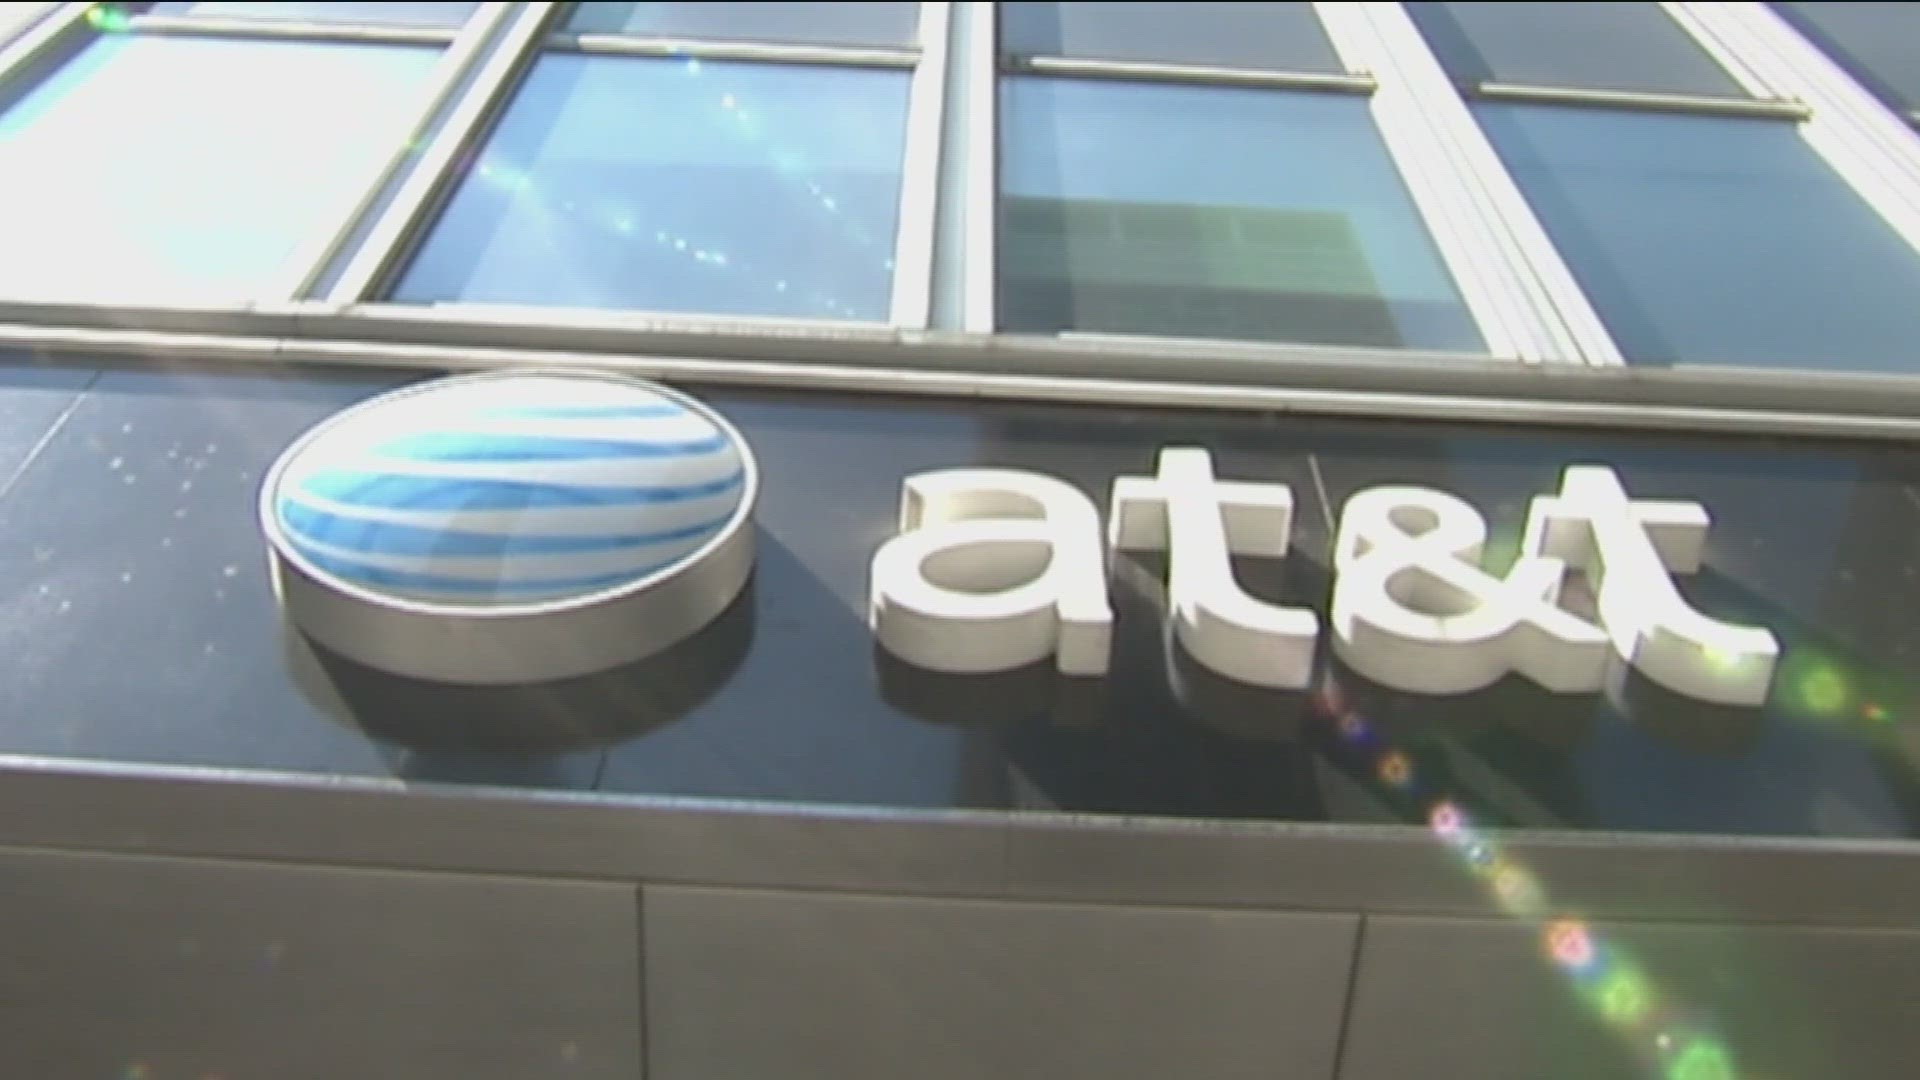 AT&T is the country's largest carrier with more than 240 million subscribers.